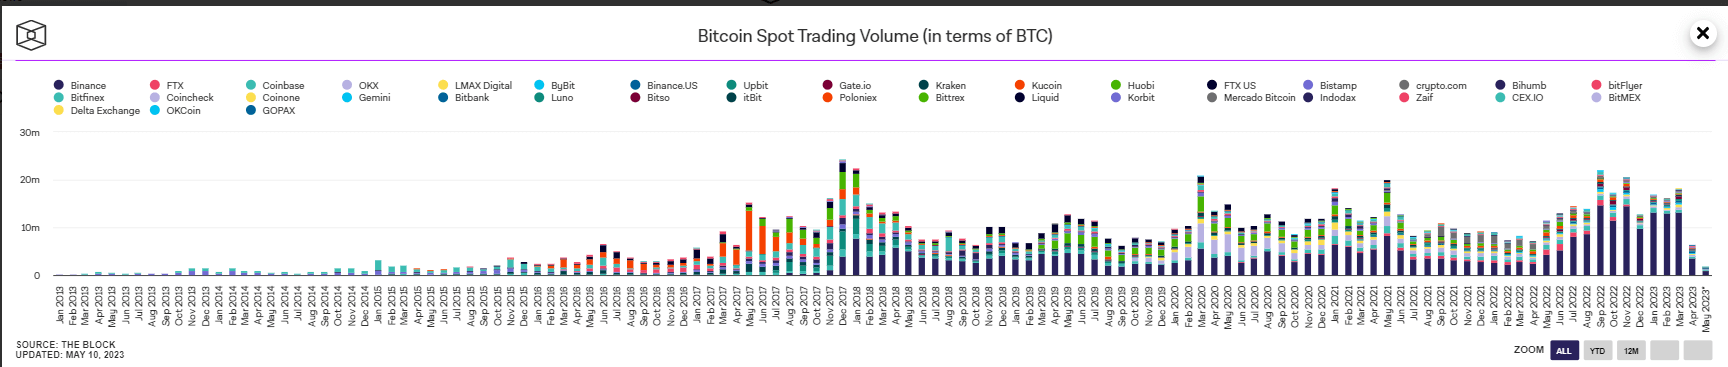 Trading Volume: (Source: The Block)